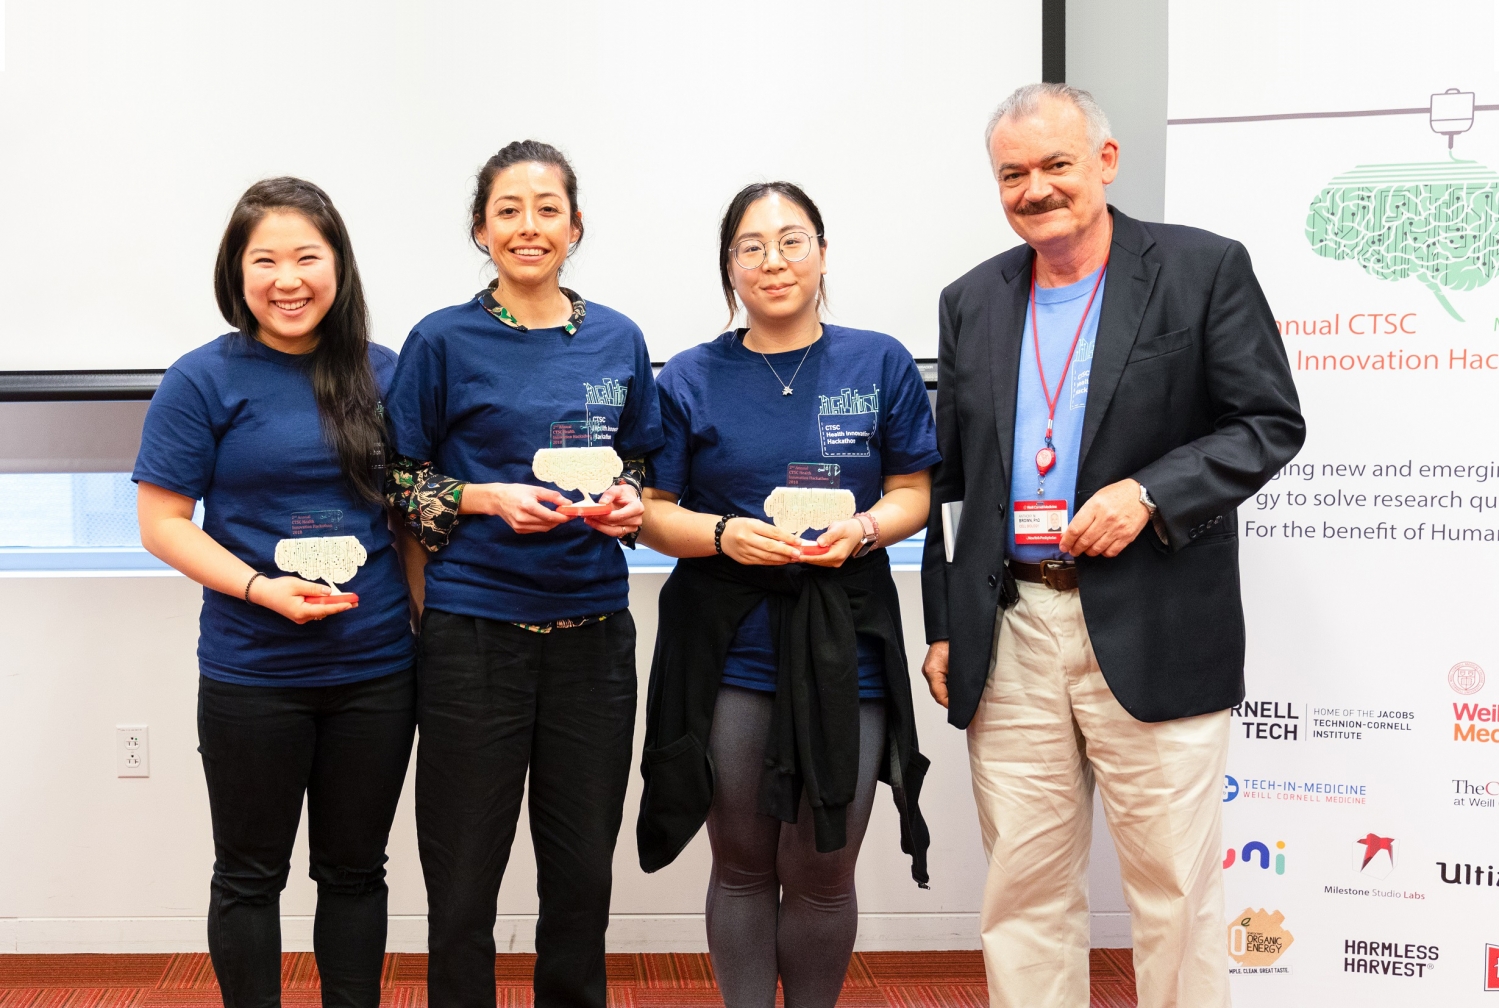 From left: Flora Baik of Weill Cornell Medicine and MSKCC fellows Daly Avendano and Shu Lei alongside Dr. Anthony Brown, the co-director of the CTSC TL1 training program at the second annual Health Innovation Hackathon